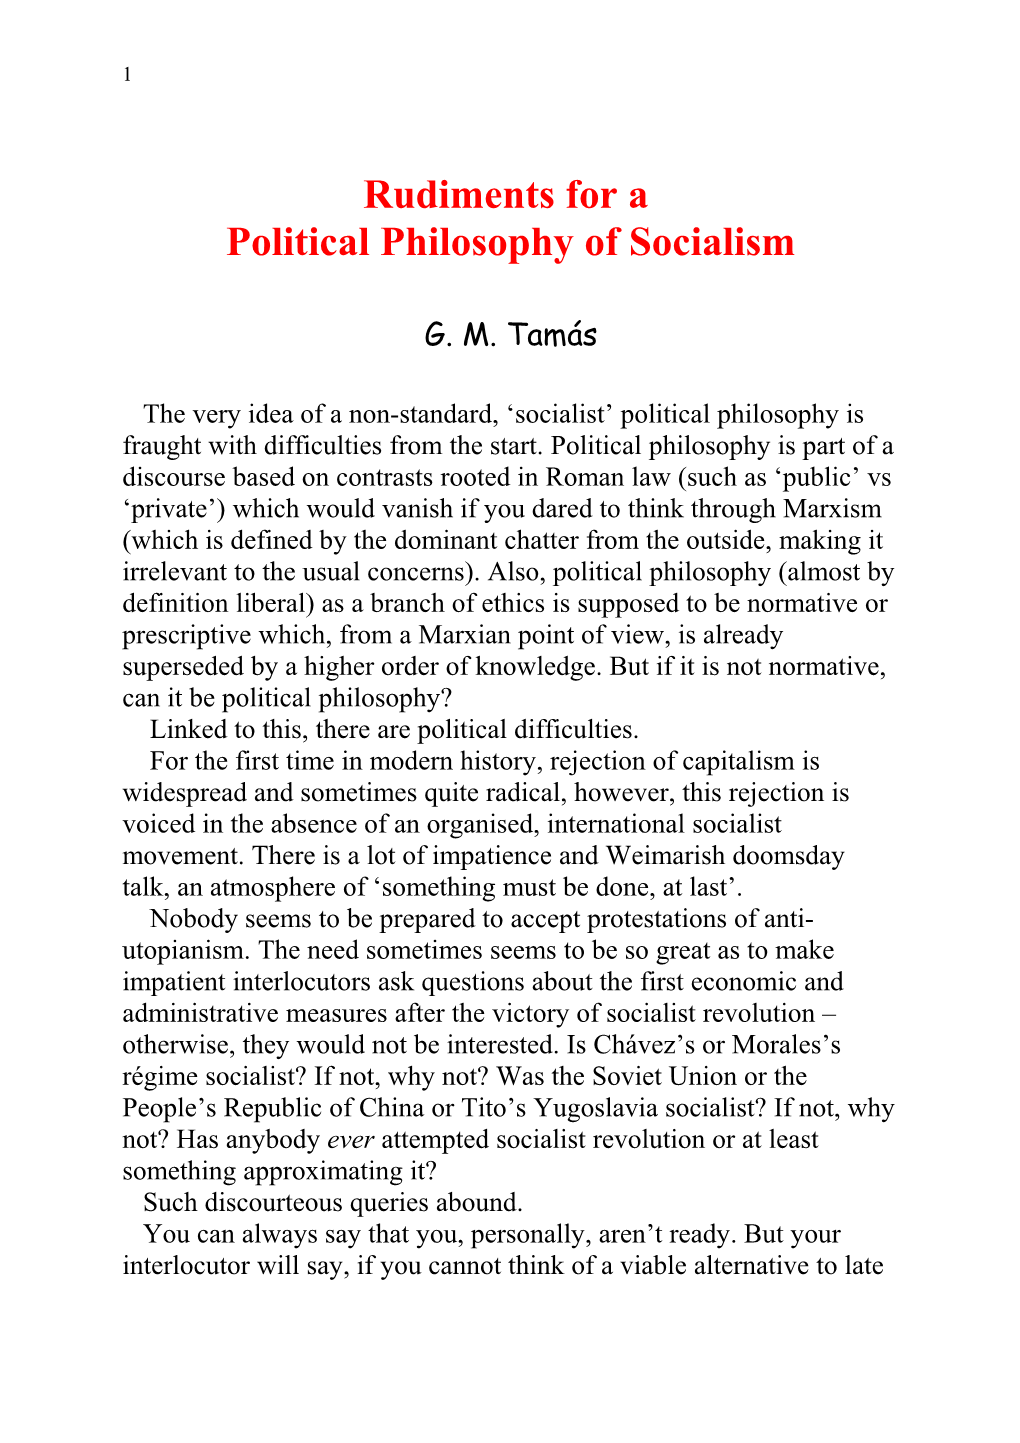 Rudiments for a Political Philosophy of Socialism